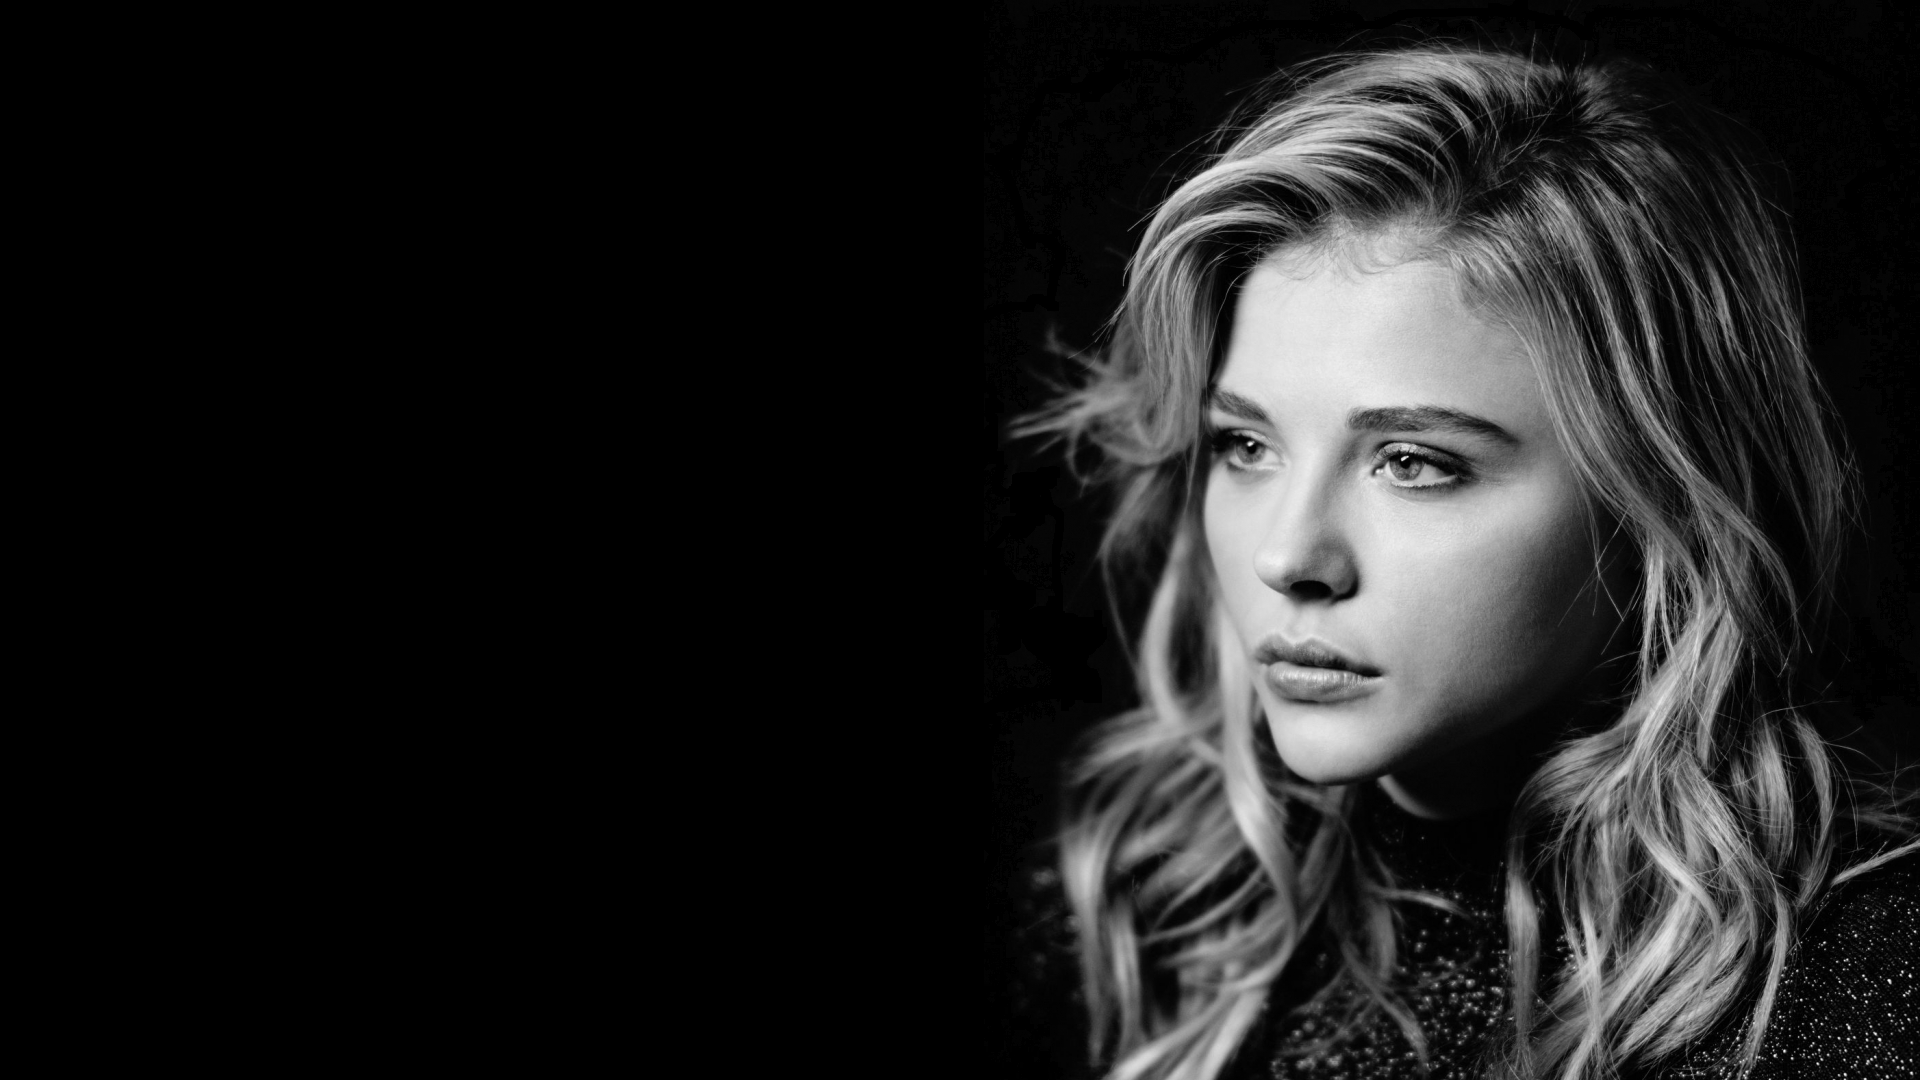 Chloe Grace Moretz Wallpaper For Android For iPhone Wallpaper HD